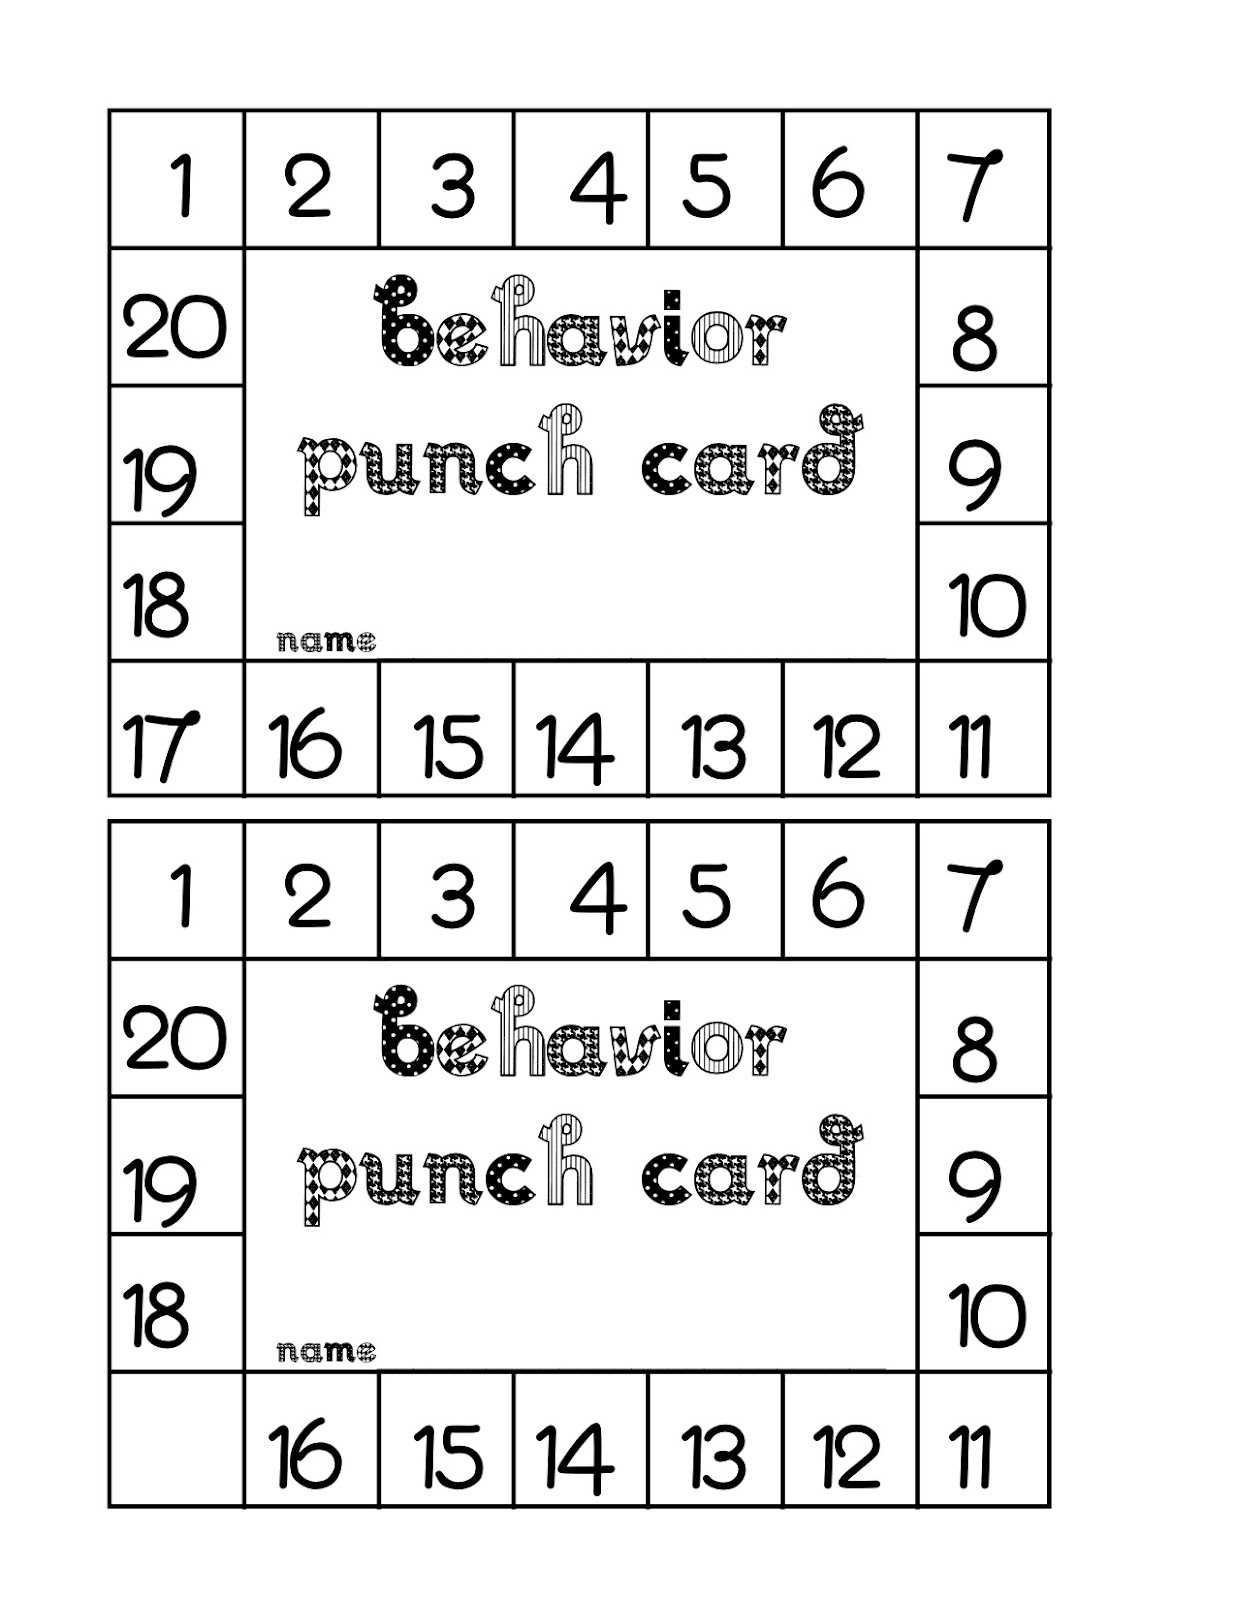 Punch Card Template Free ] – Free Printable Punch Card Pertaining To Reward Punch Card Template